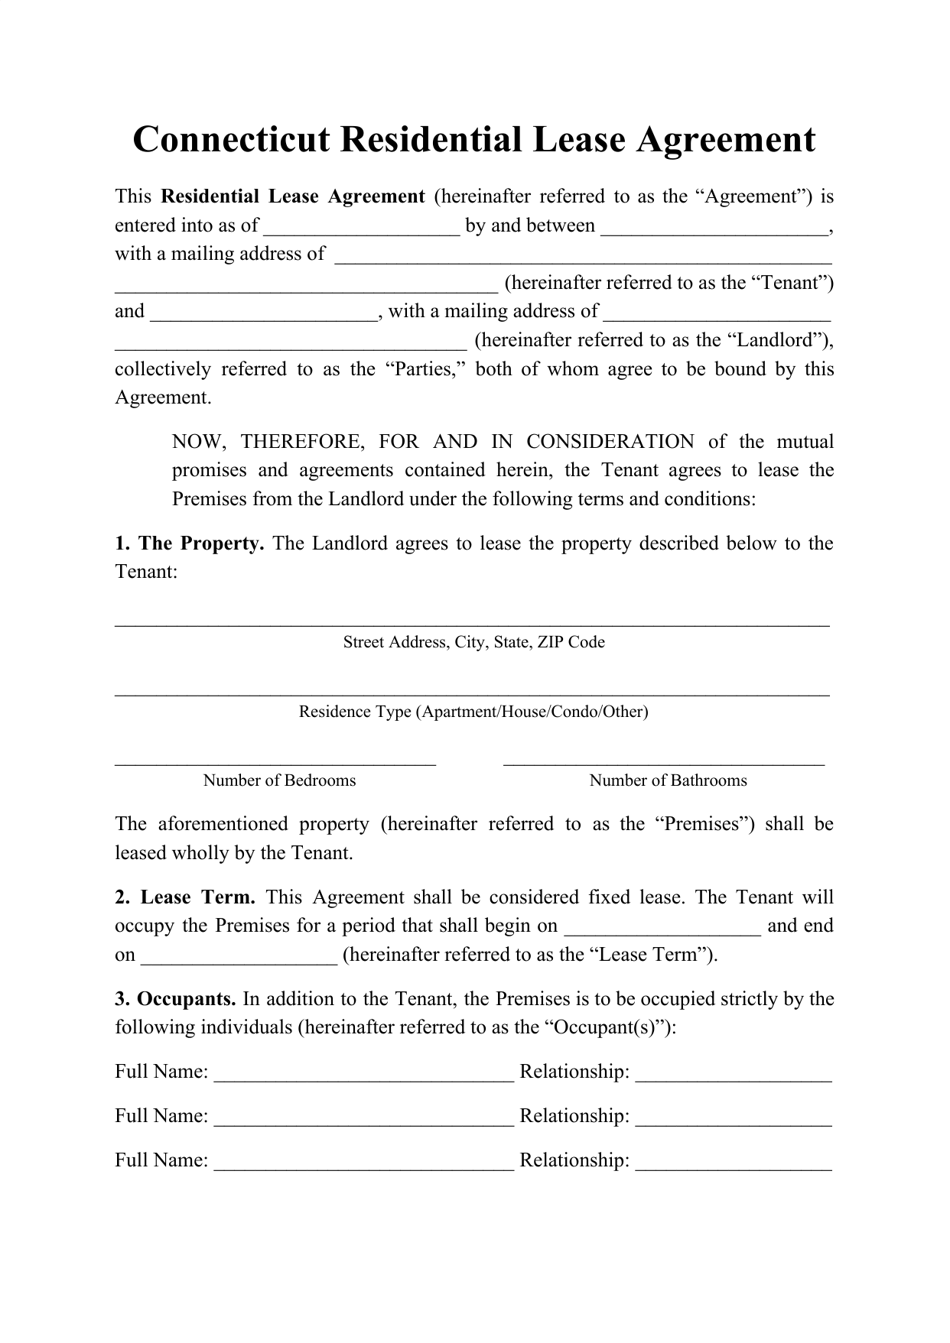 Residential Lease Agreement Template - Connecticut, Page 1